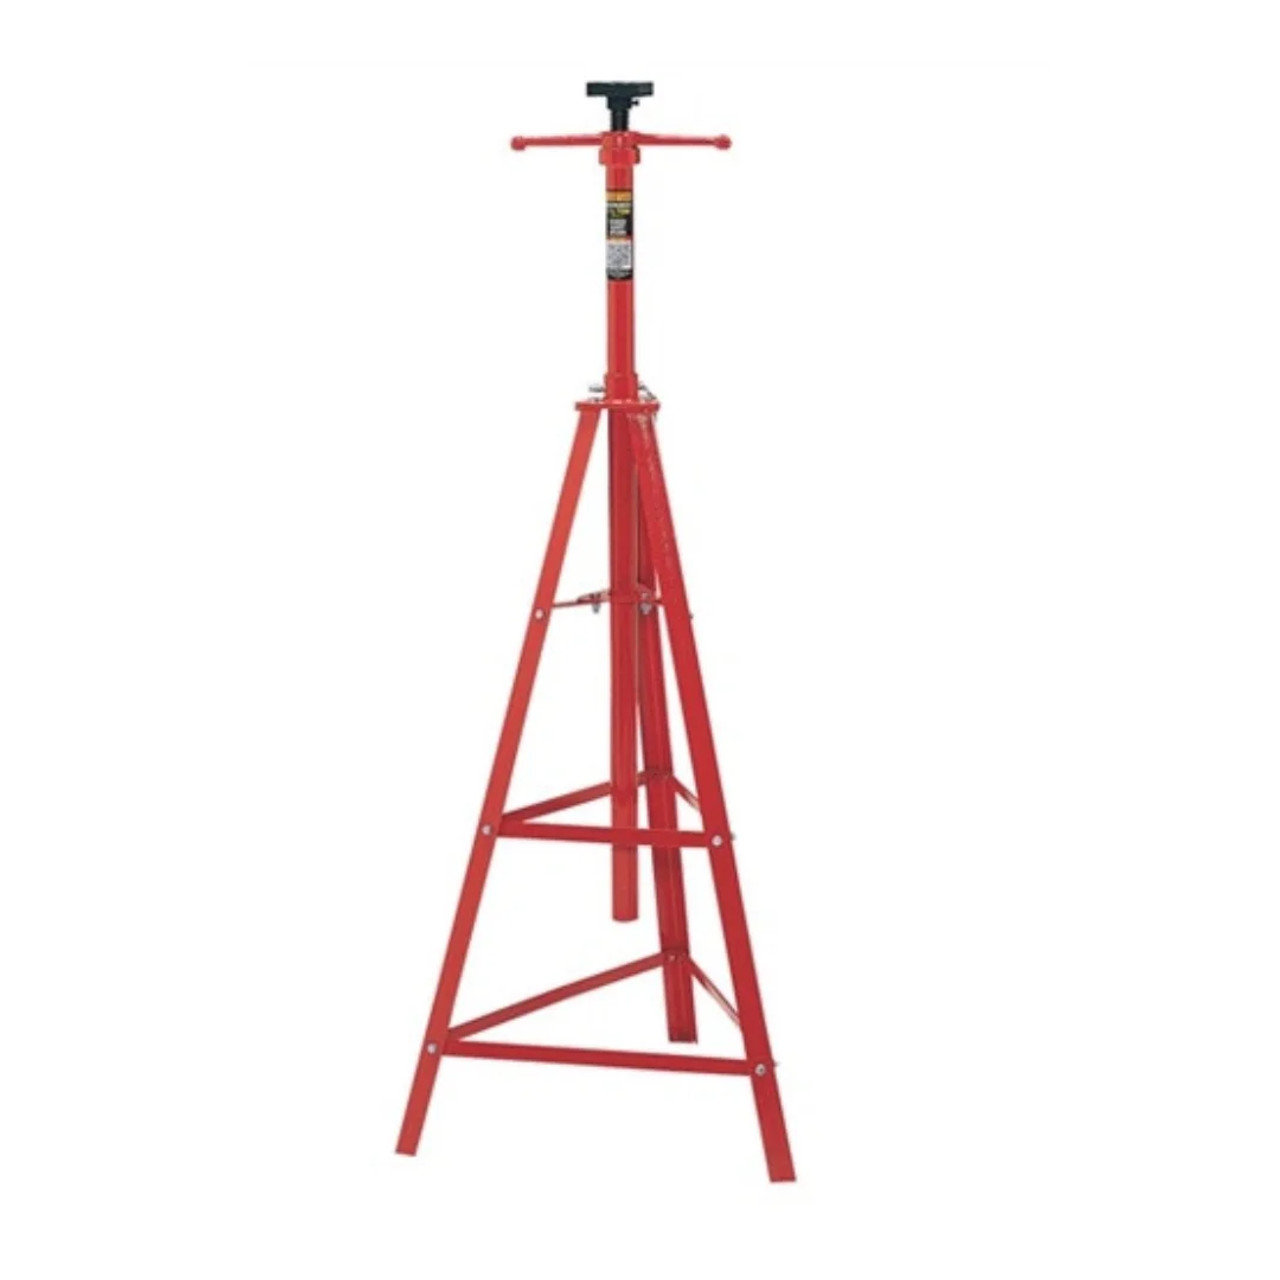 Norco 81035A 1-1/2 Ton Capacity Under Hoist Stand